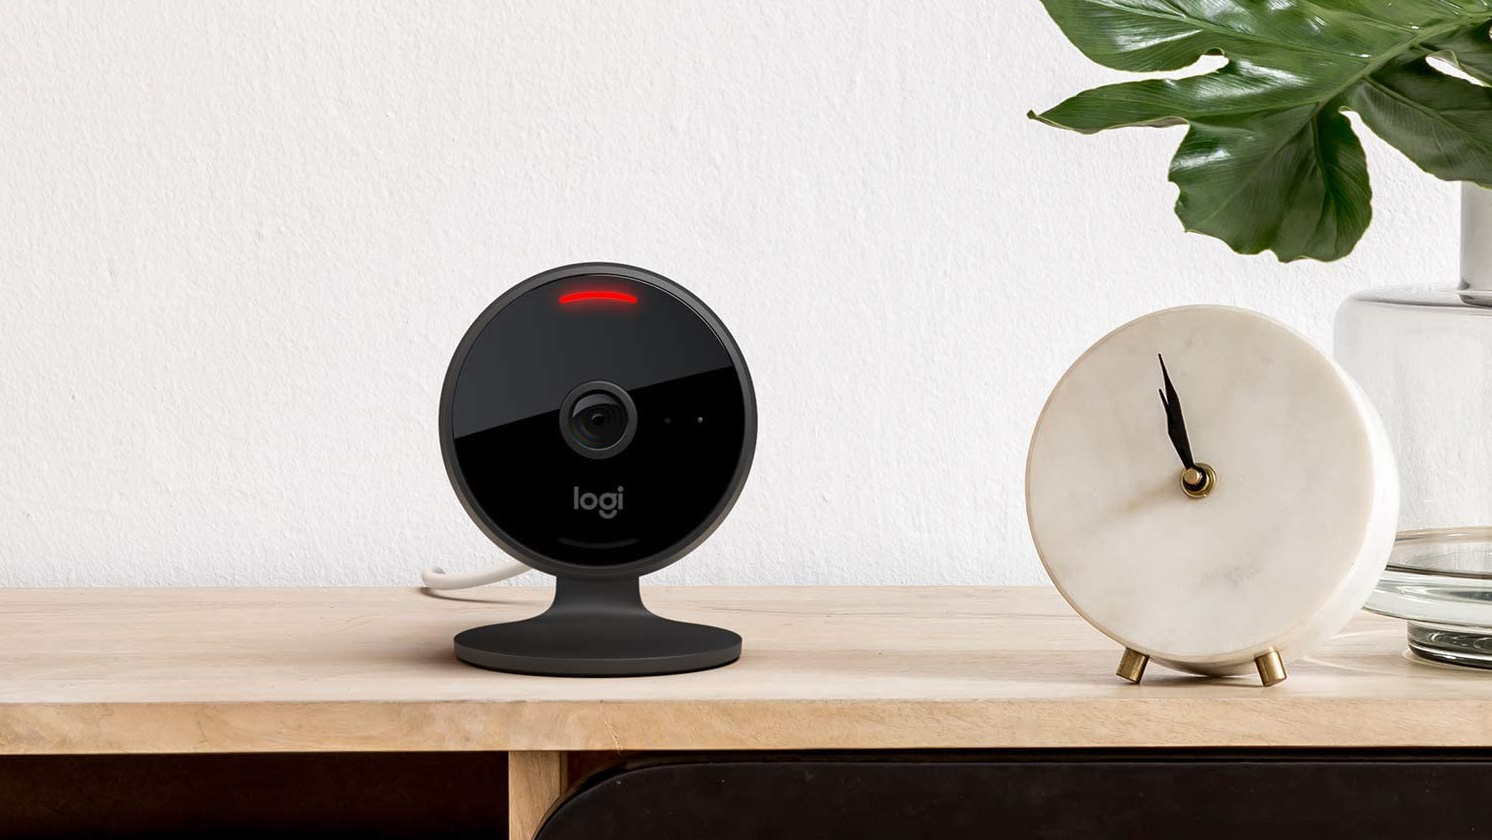 A Logitech Circle View security camera, compatible with Apple HomeKit